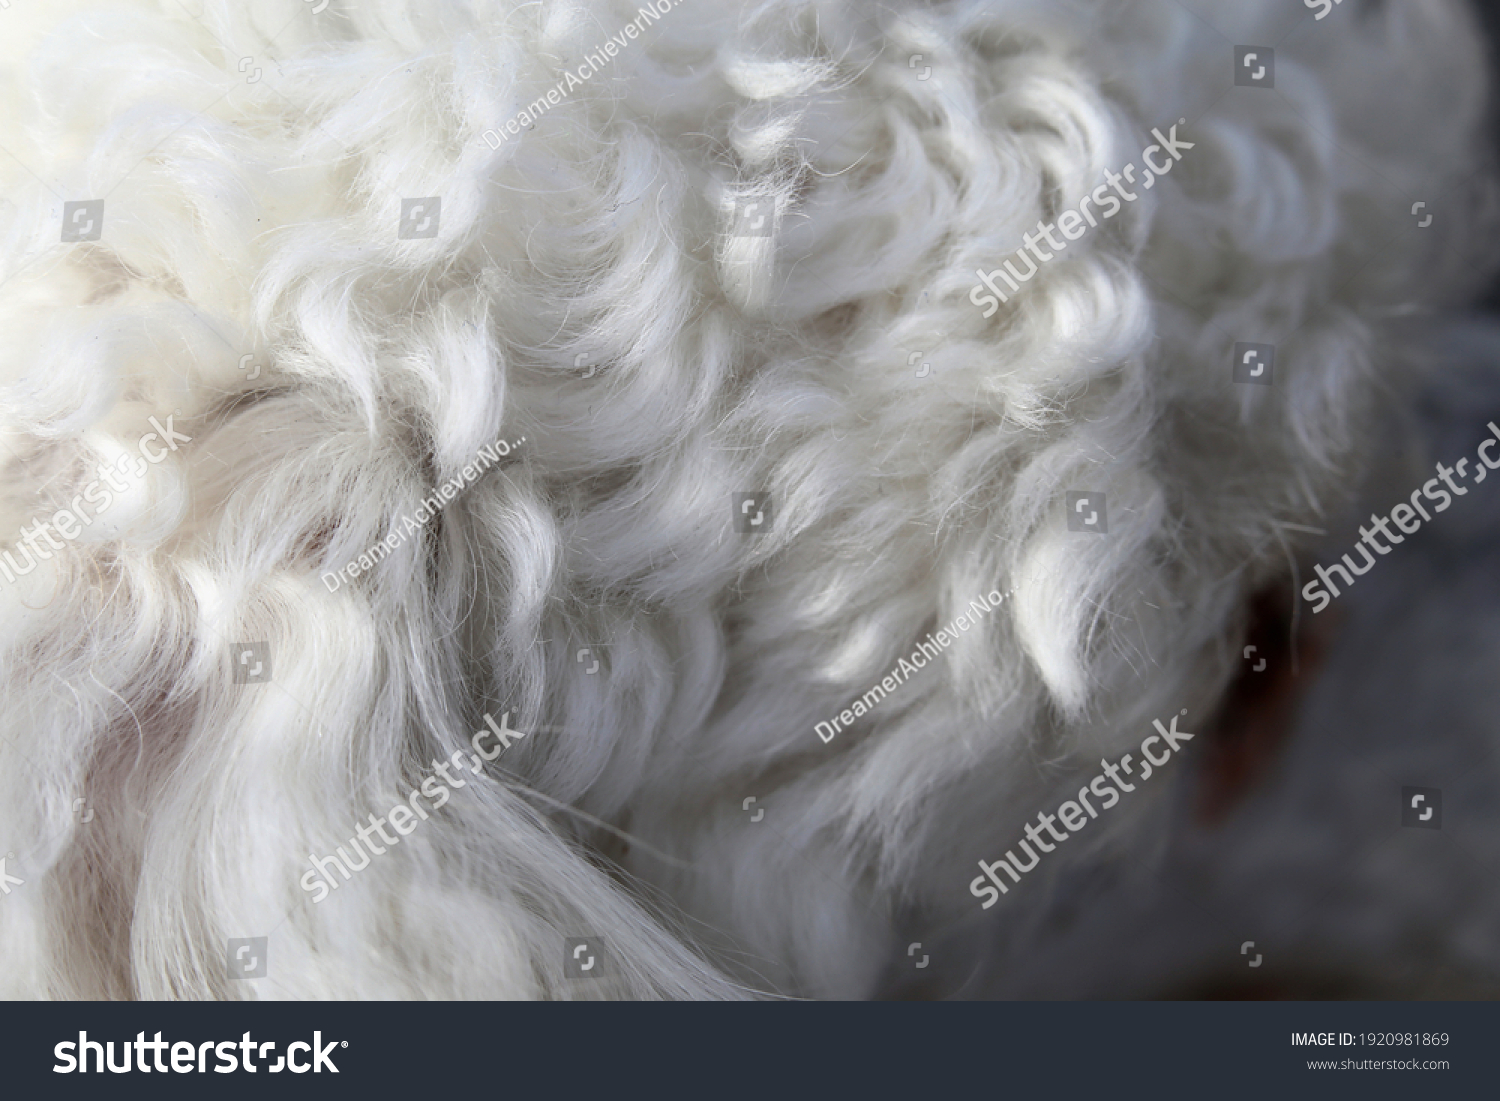 White miniature poodle in a closeup. Soft, fluffy, curly fur of the friendly little pet dog. Lovely texture. Closeup of the poodle fur, hairy, cute surface ready to be pet! Adorable animal. #1920981869